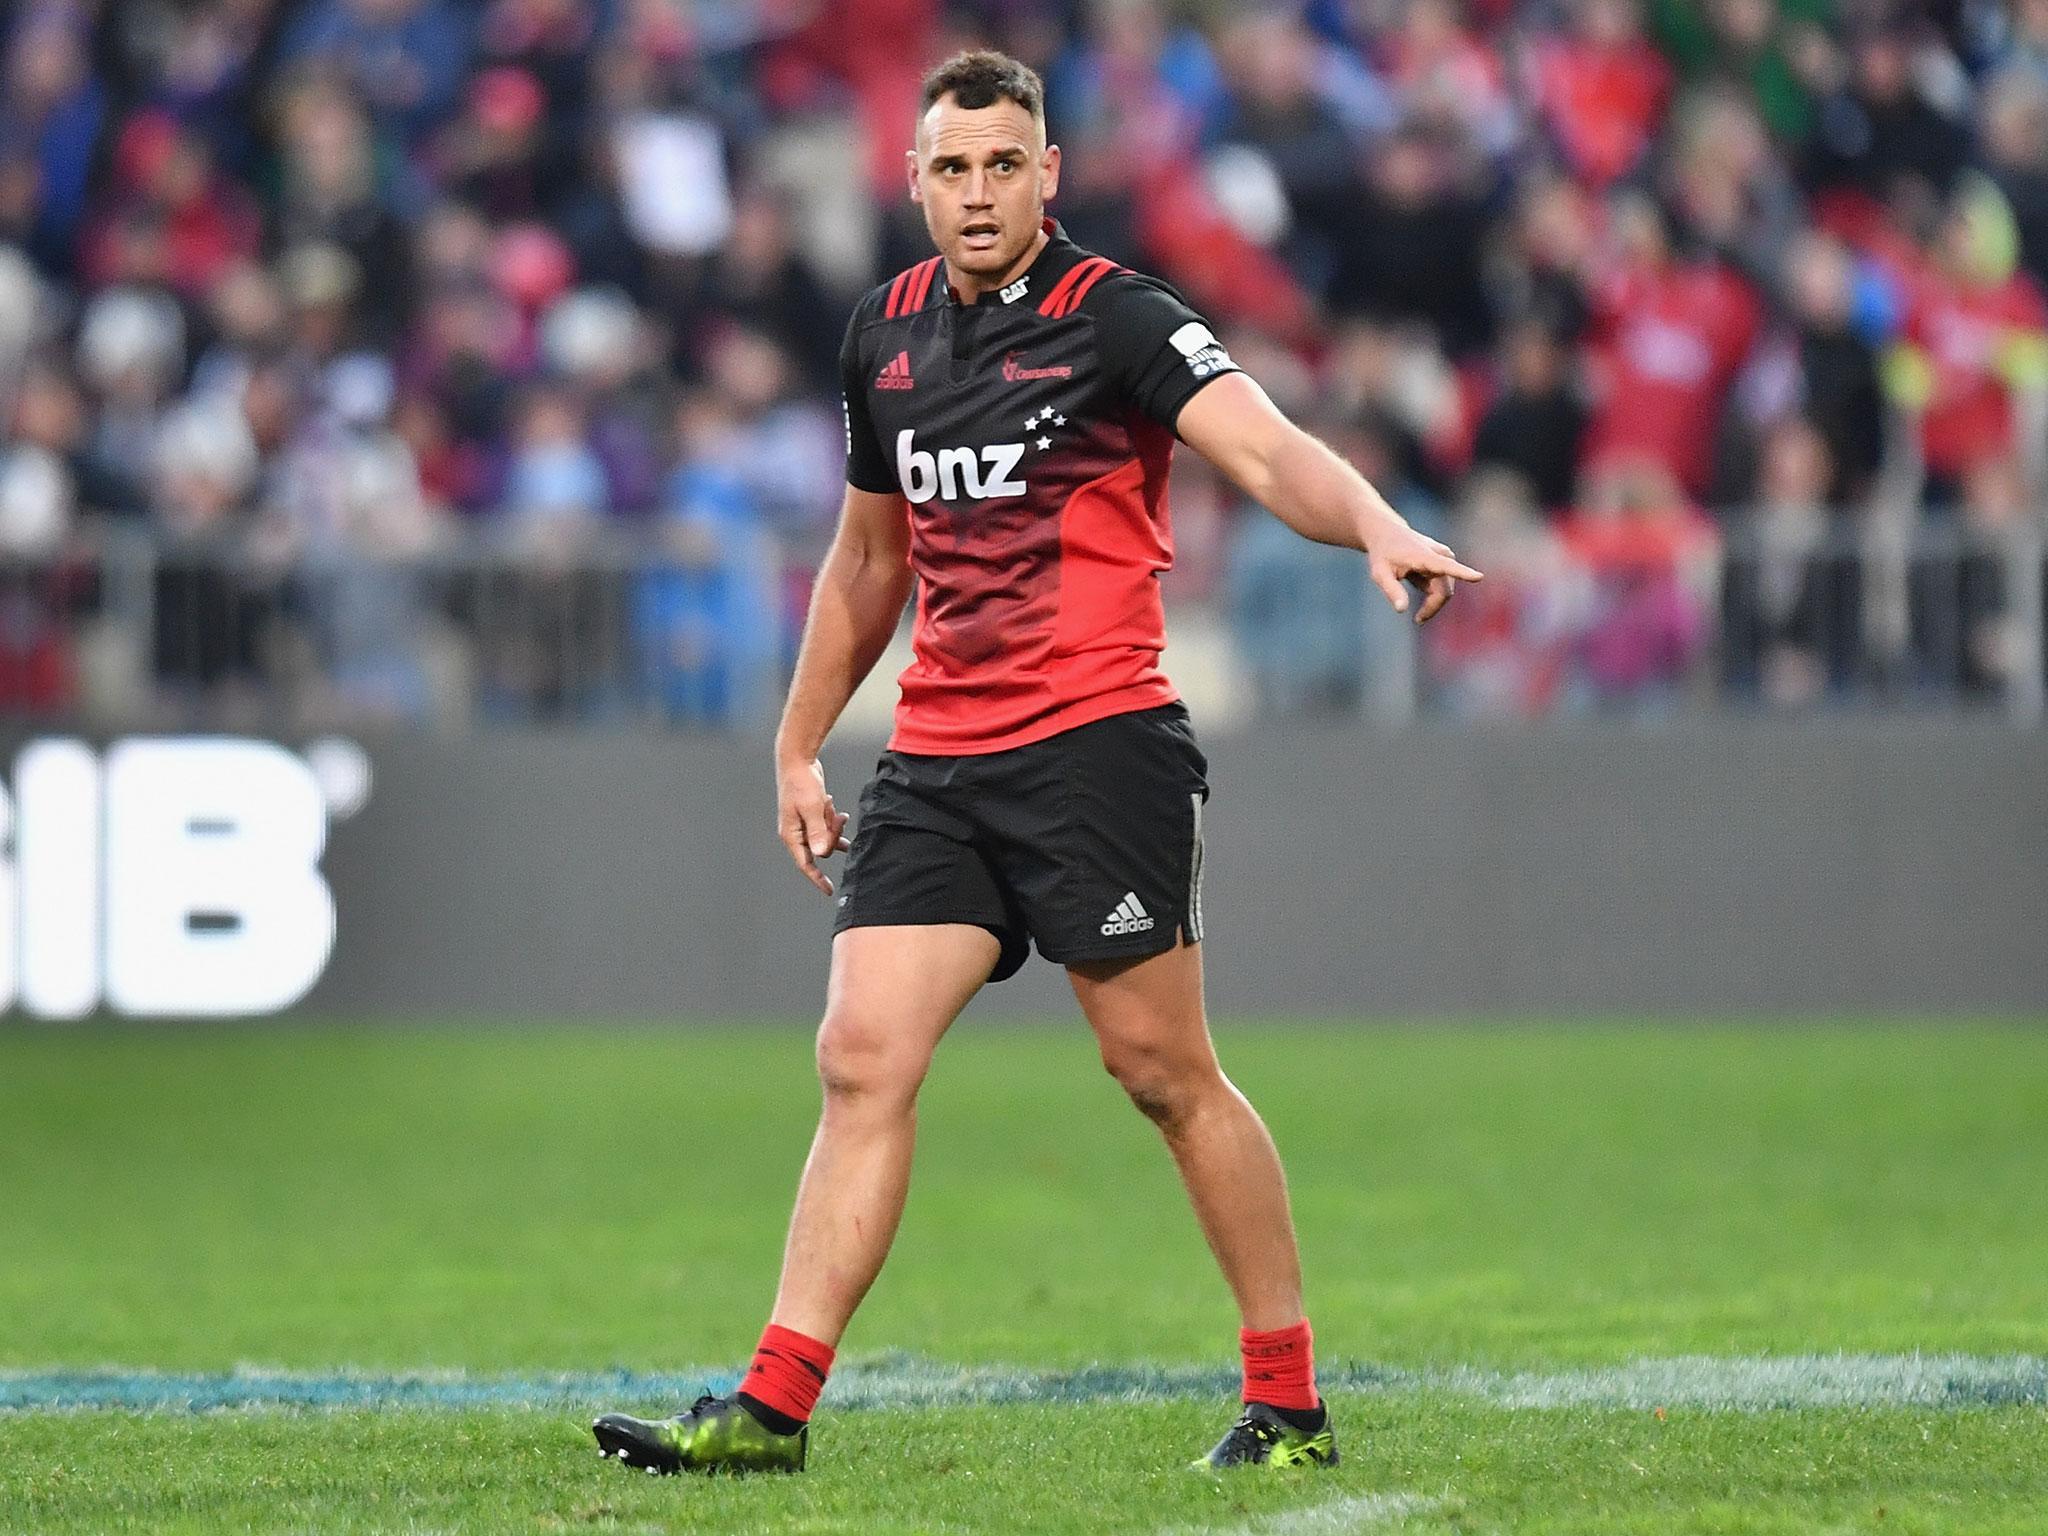 Israel Dagg is expecting an angry Lions side when his Crusaders side face them this weekend